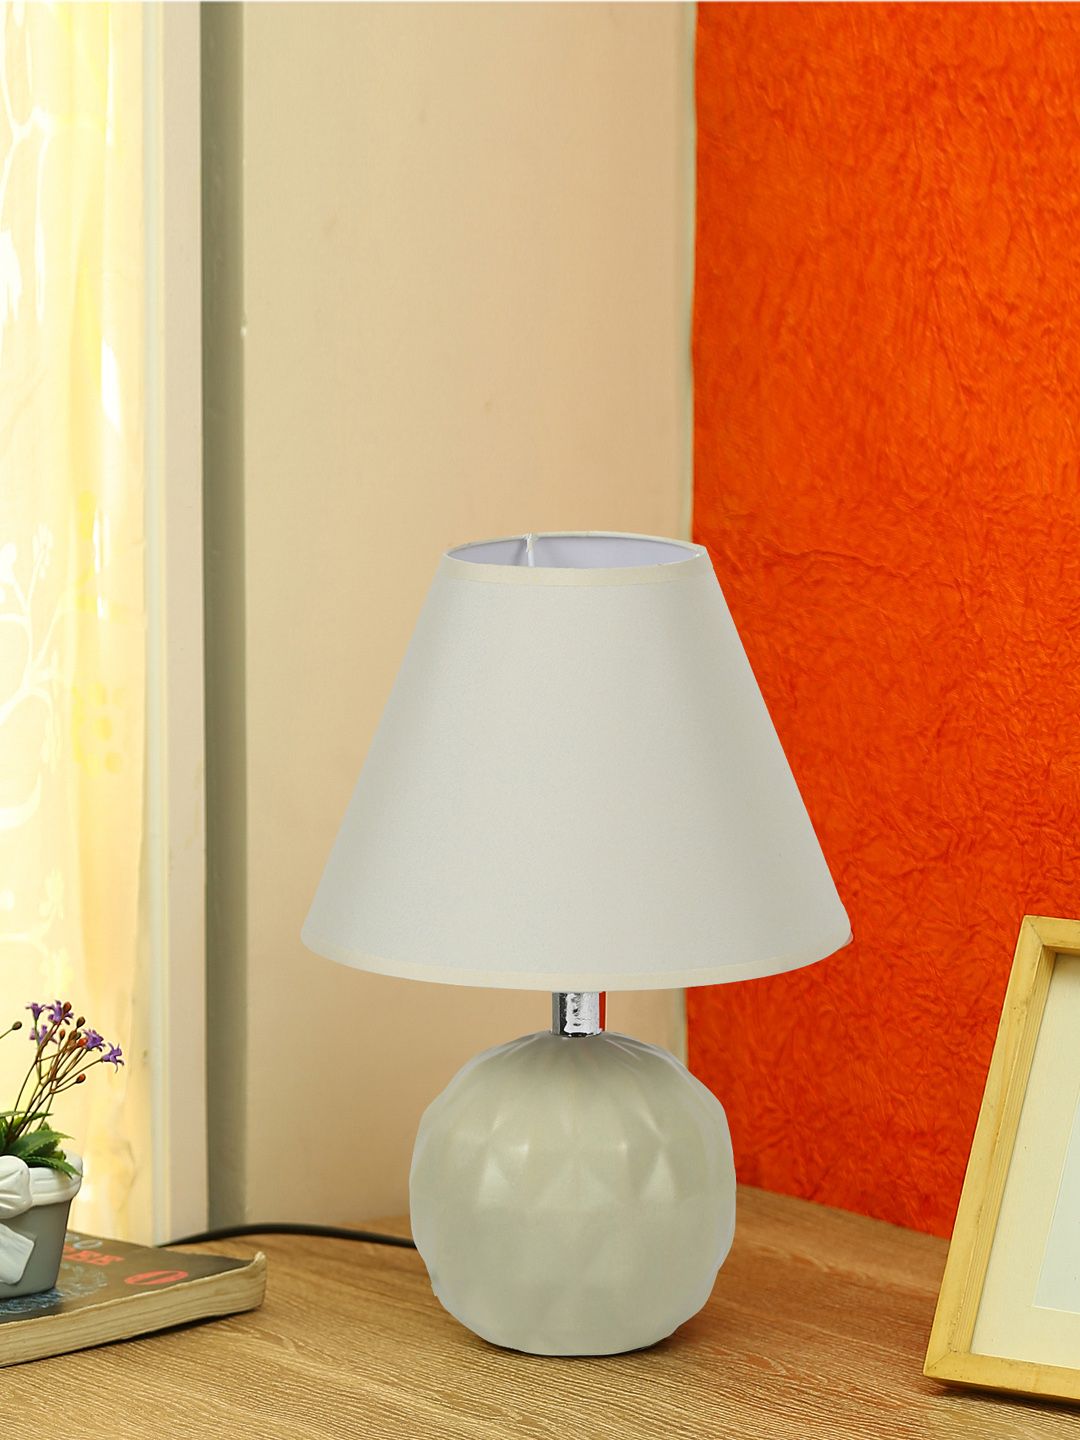 Aapno Rajasthan Cream-Coloured Textured Ceramic Table Lamp With Shade Price in India